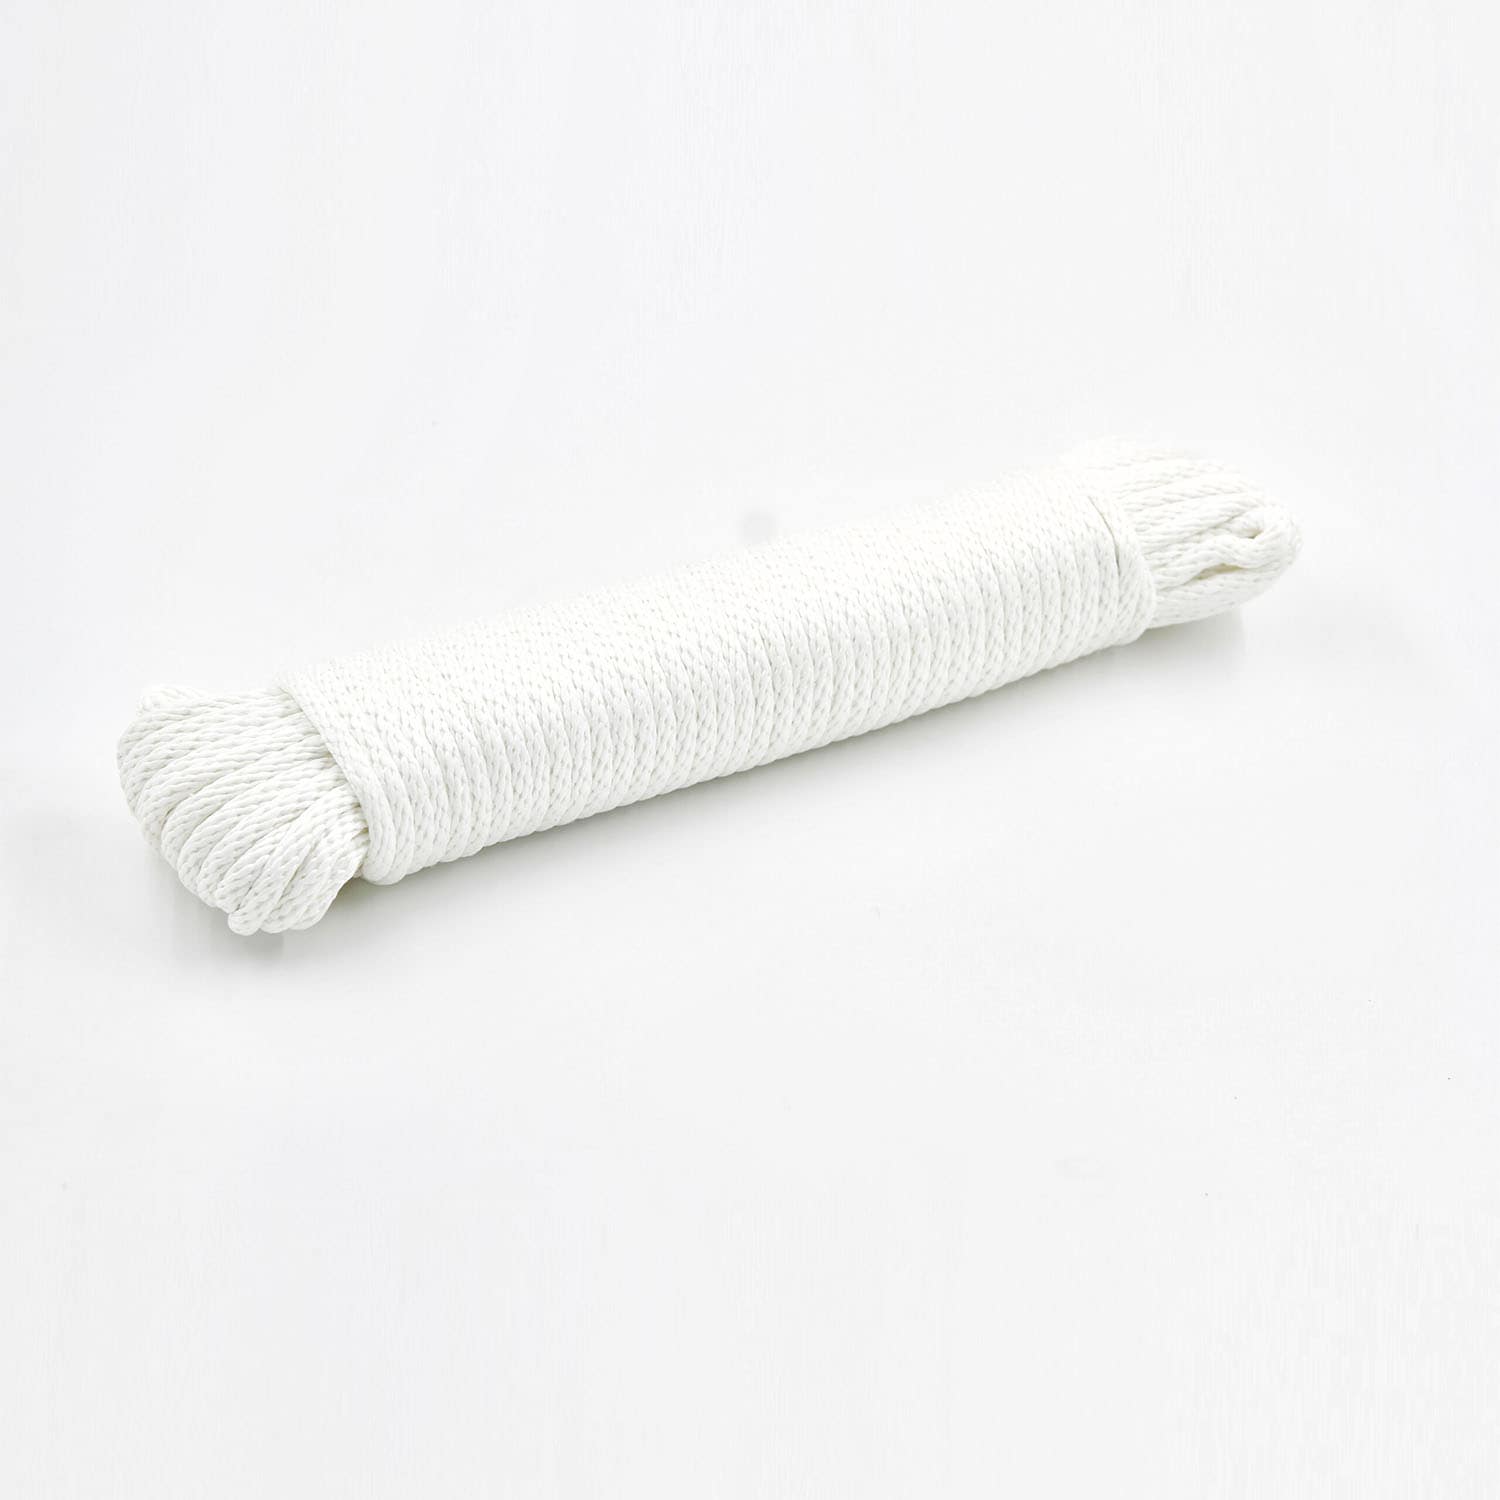 Soft Cotton Rope Braided Rope Multi-purpose Clothes Drying Rope  Outdoors